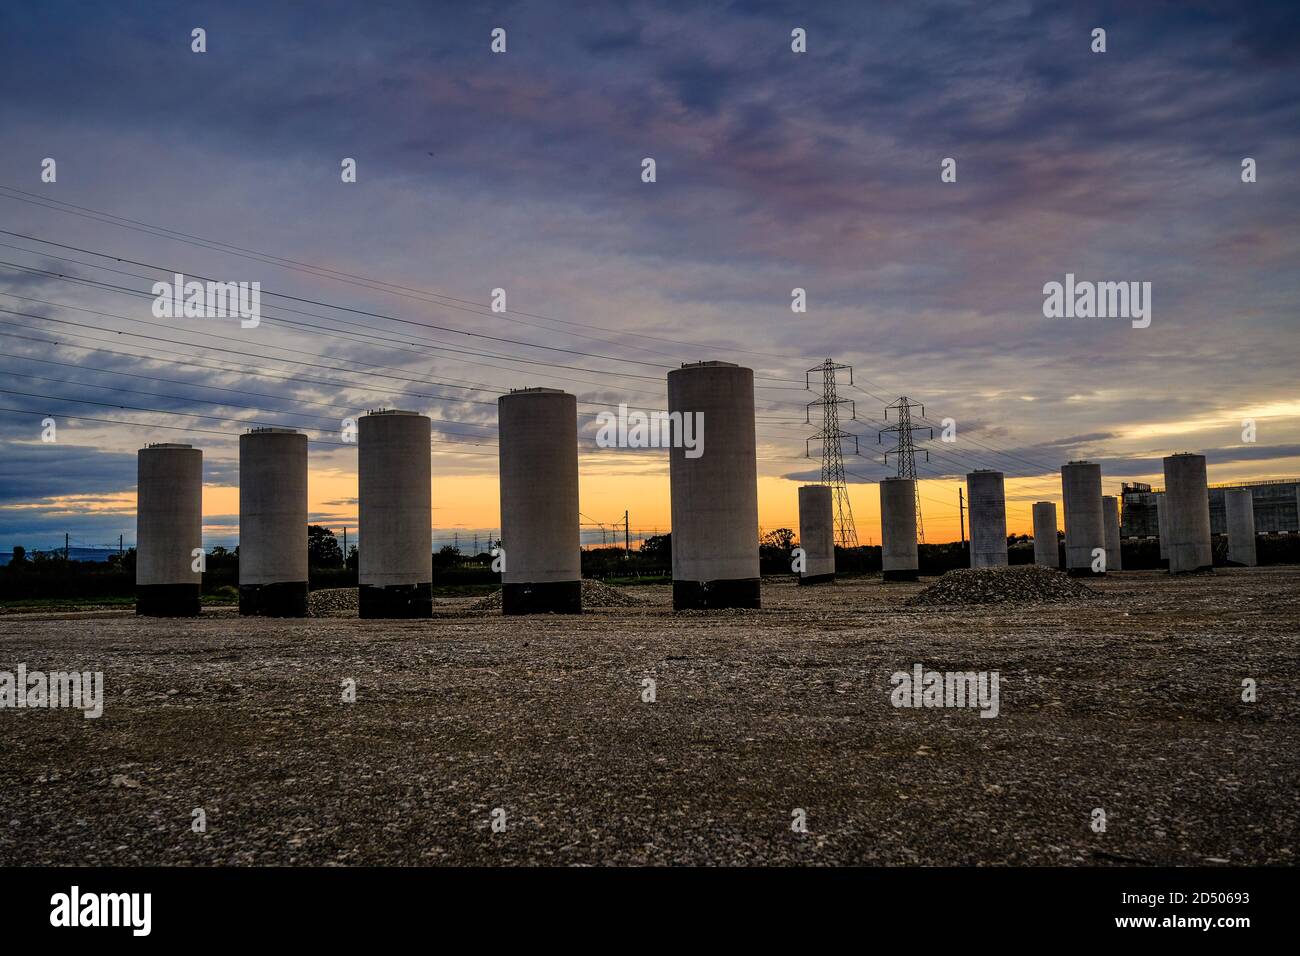 Bridge support pillars at the construction site for the ne Western Distributor Road which will join part of Preston to the M55 Motorway. Stock Photo